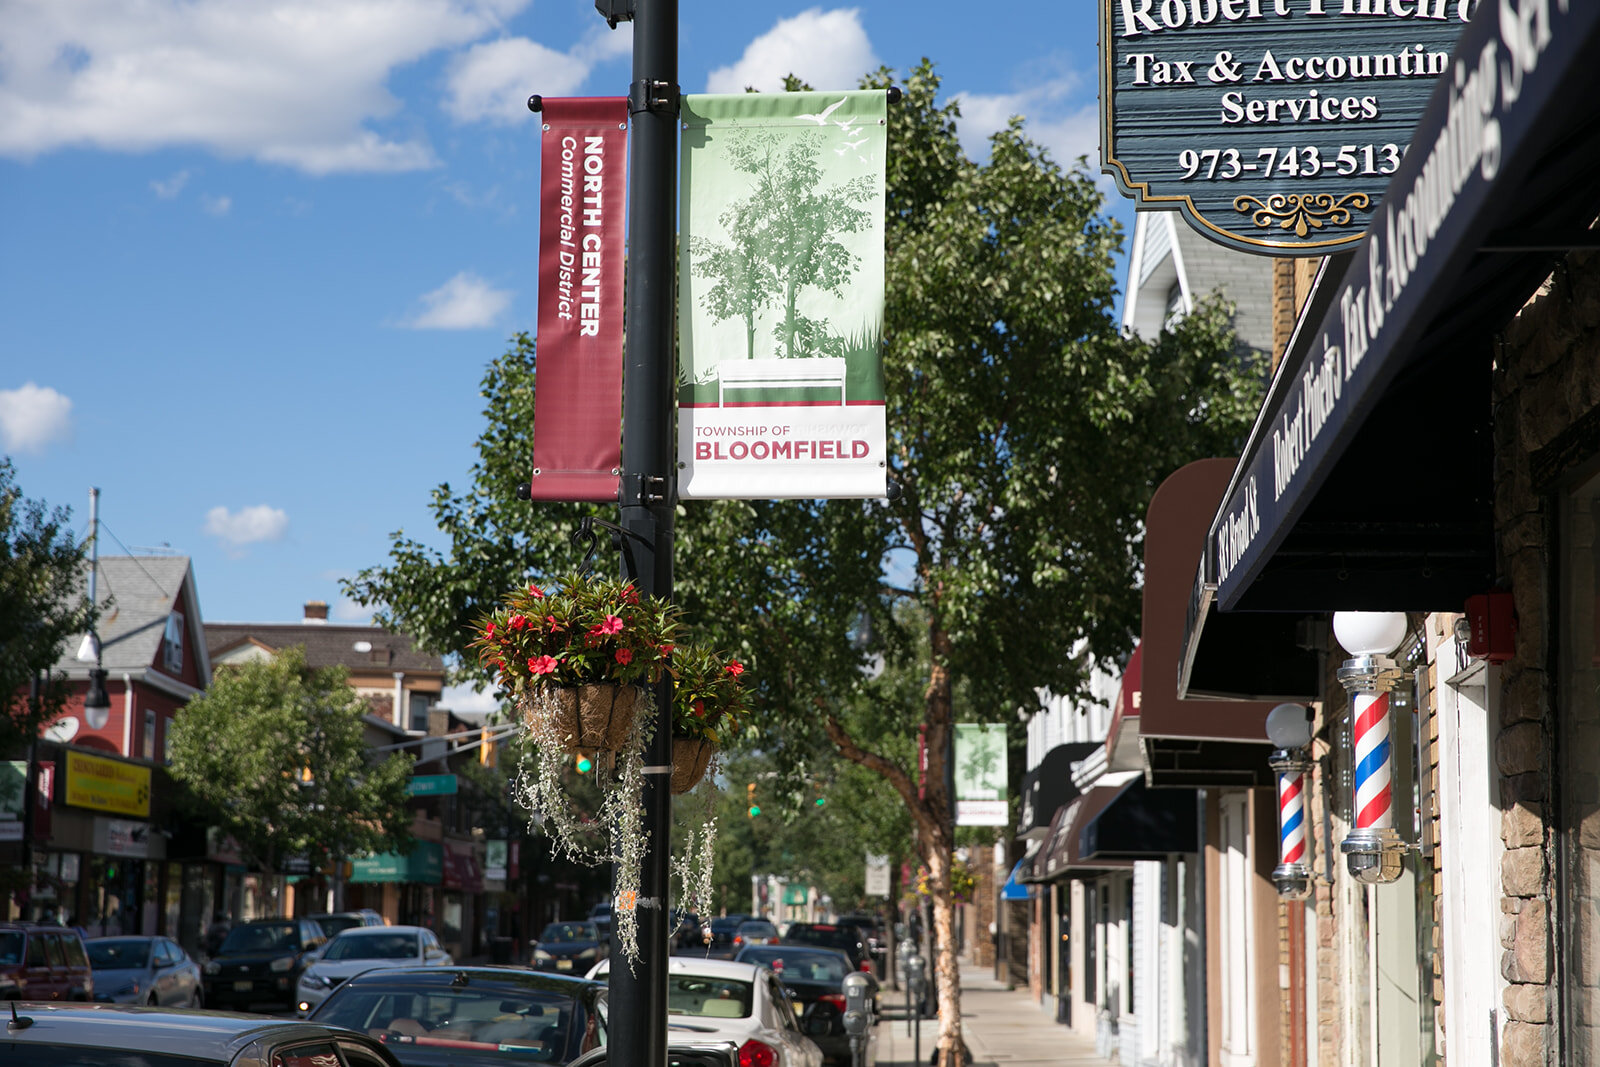 NY Times: Bloomfield, a starter for suburbanites